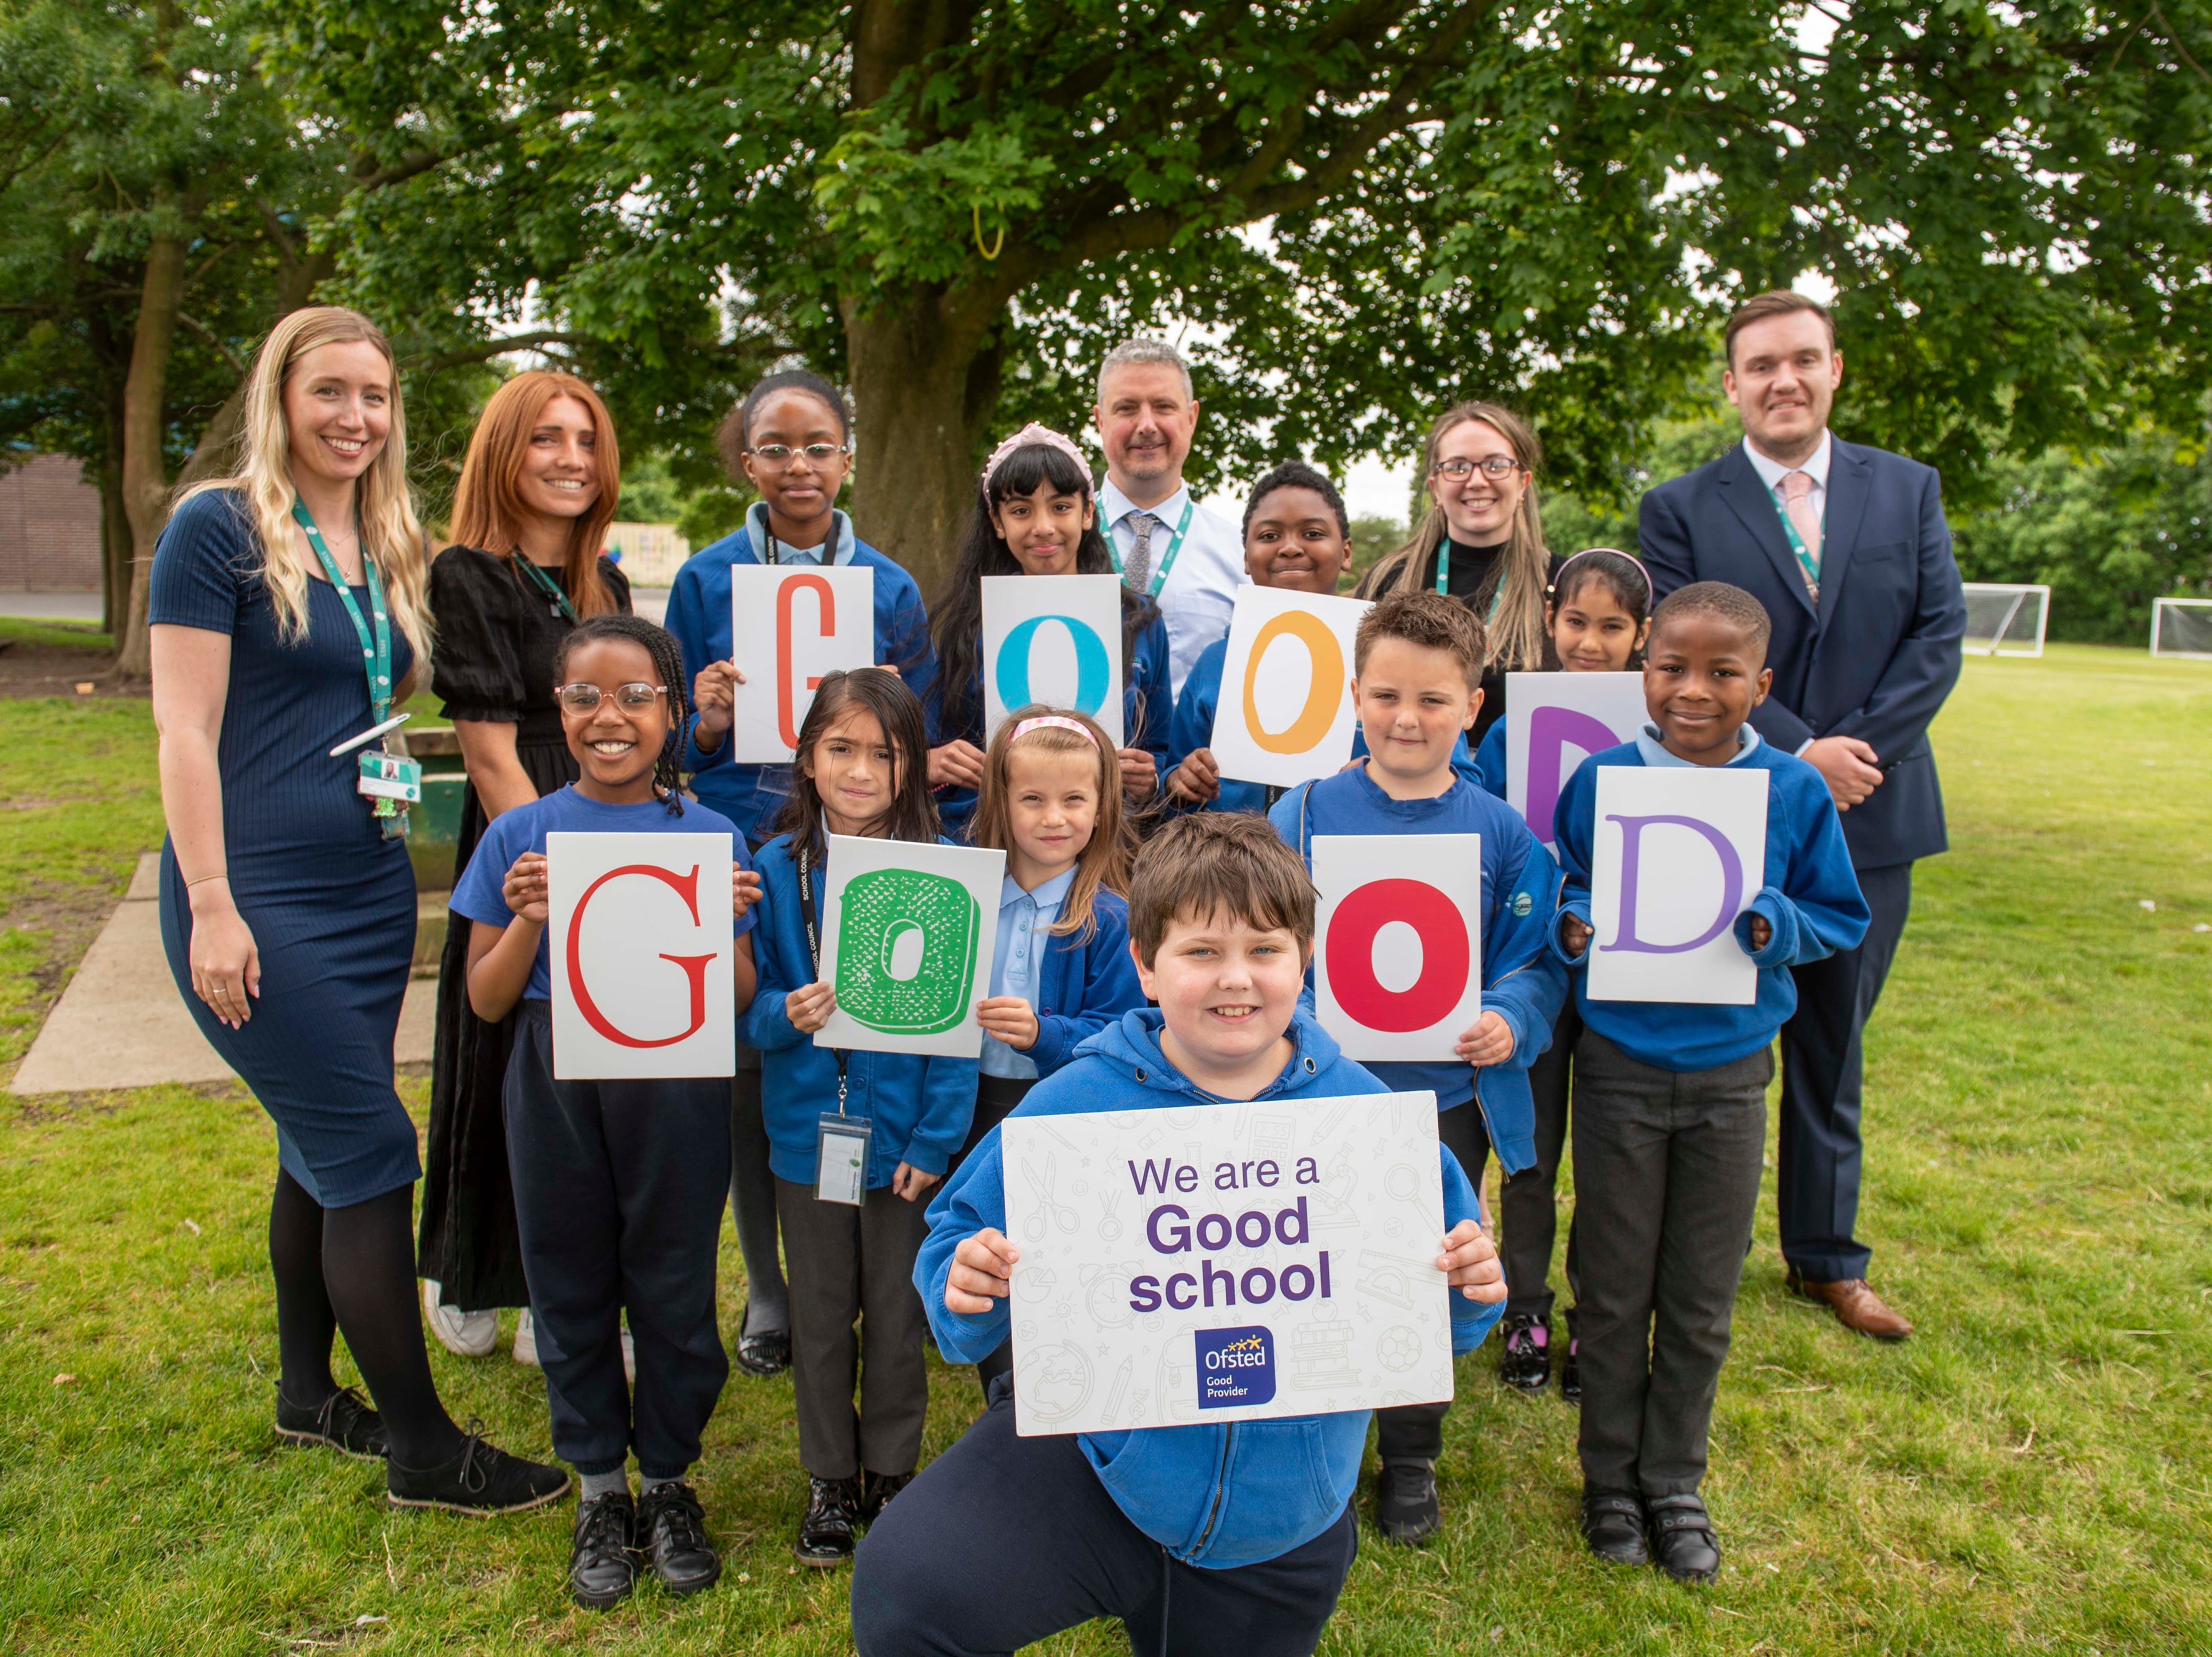 Wolverhampton school retains 'Good' Ofsted rating 